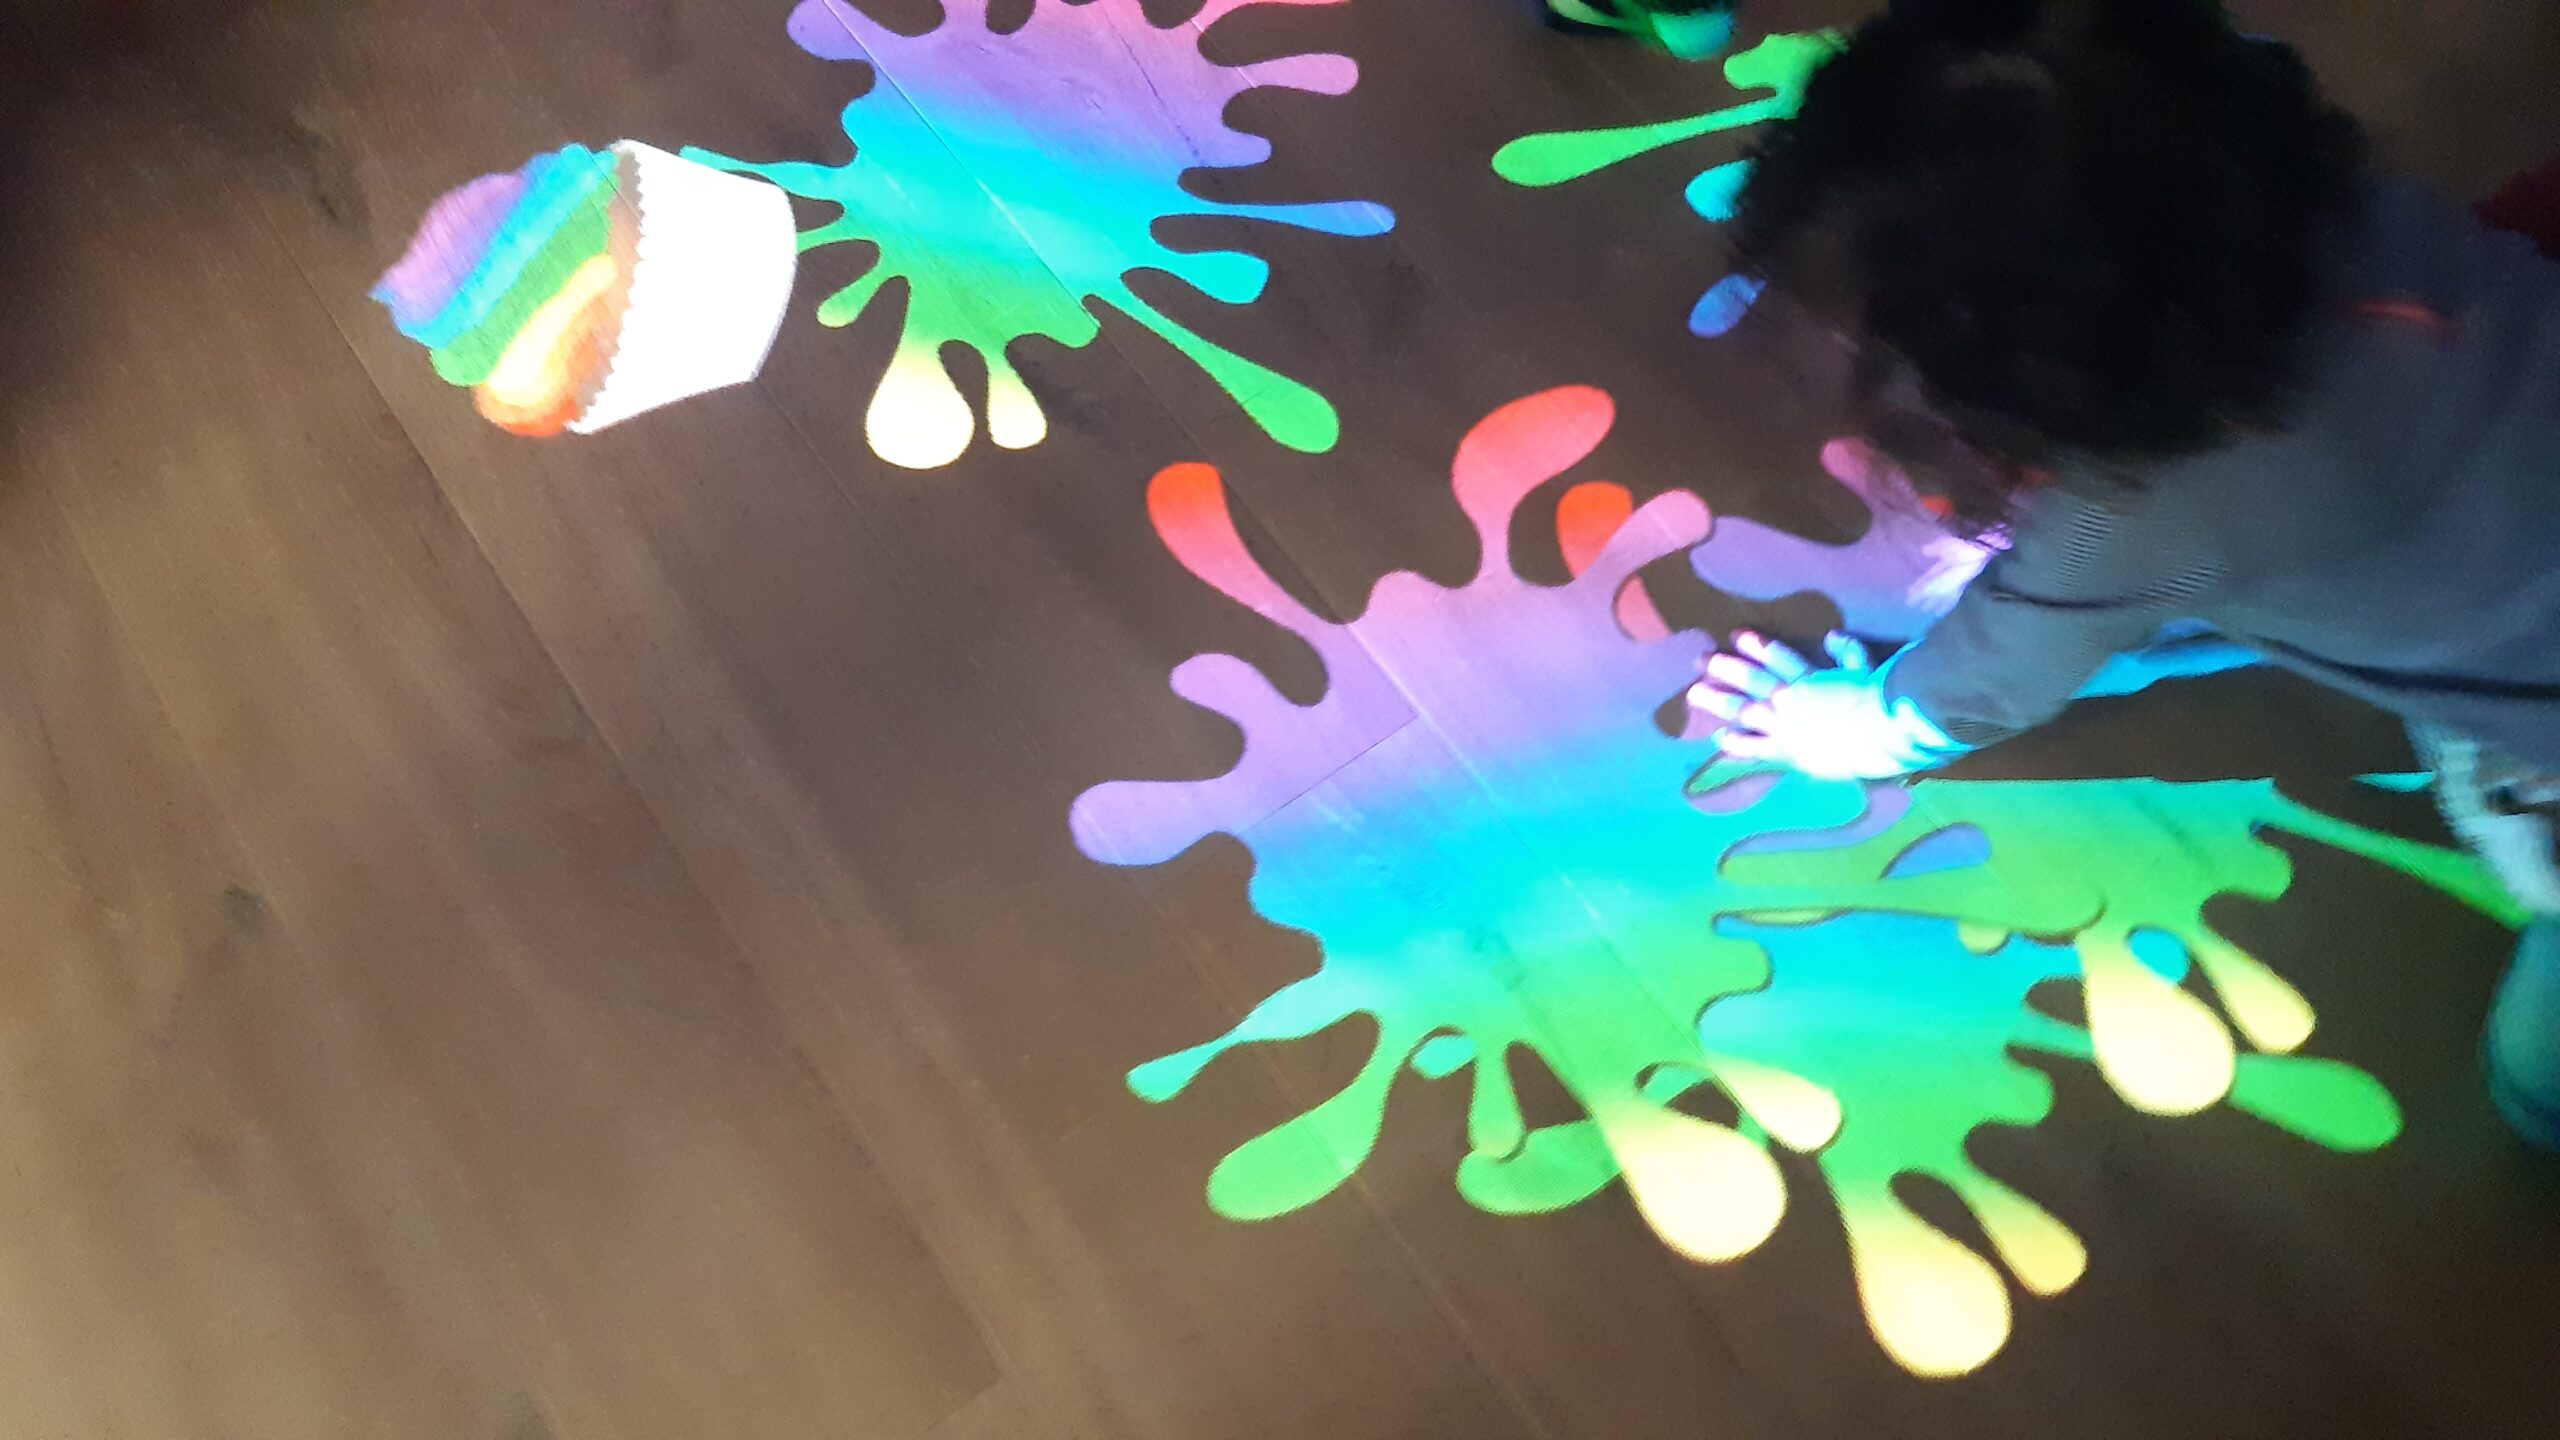 Pre-school child playing with interactive projector (projecting colourful paint splashes on floor)